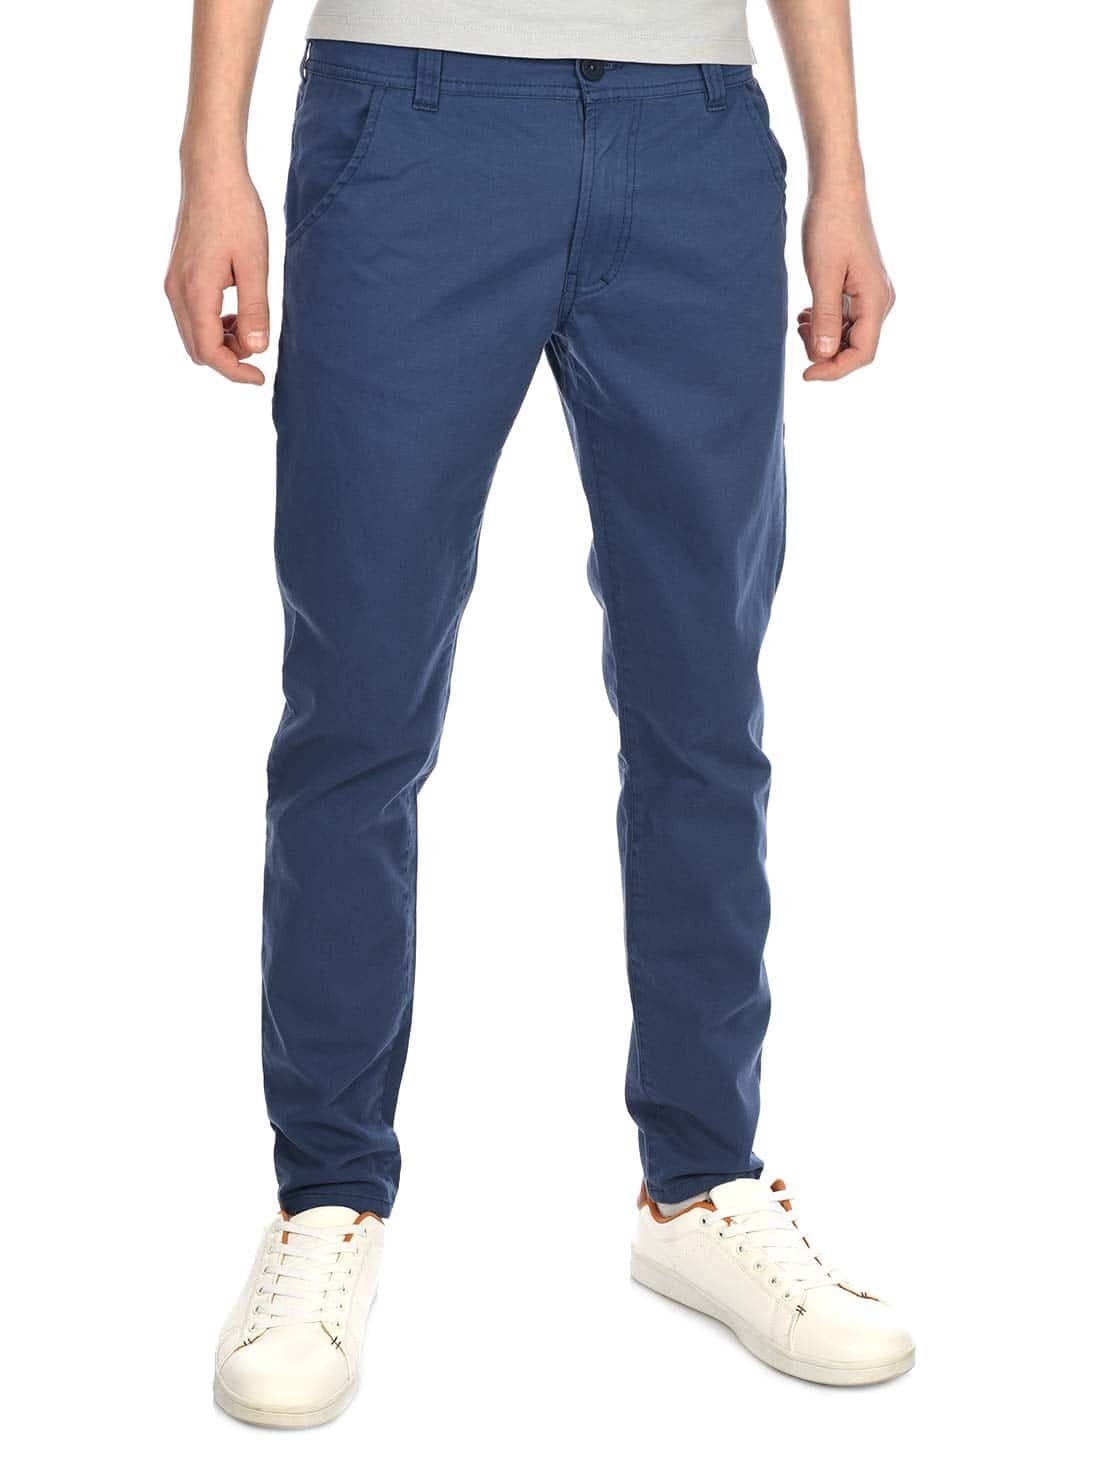 (1-tlg) Chino Jeansblau BEZLIT Hose Chinohose Jungen casual